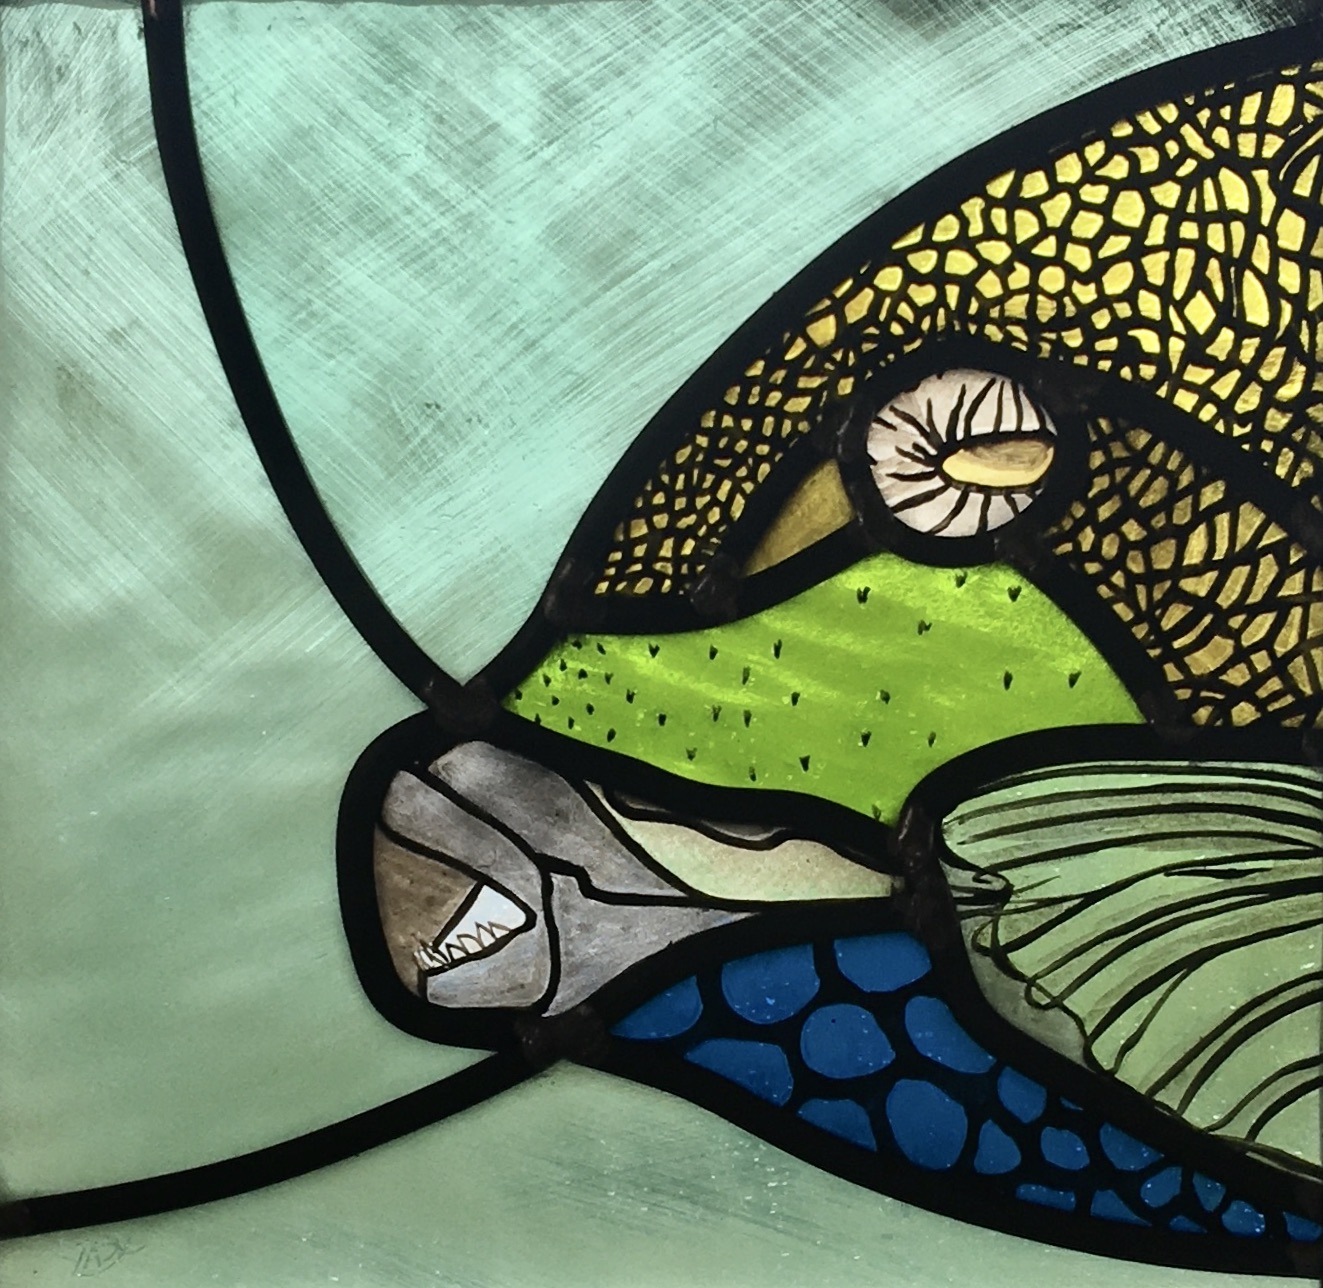 Neon blue and green and grey, designed to help me catch my prey. Titan Trigger Fish - Israel